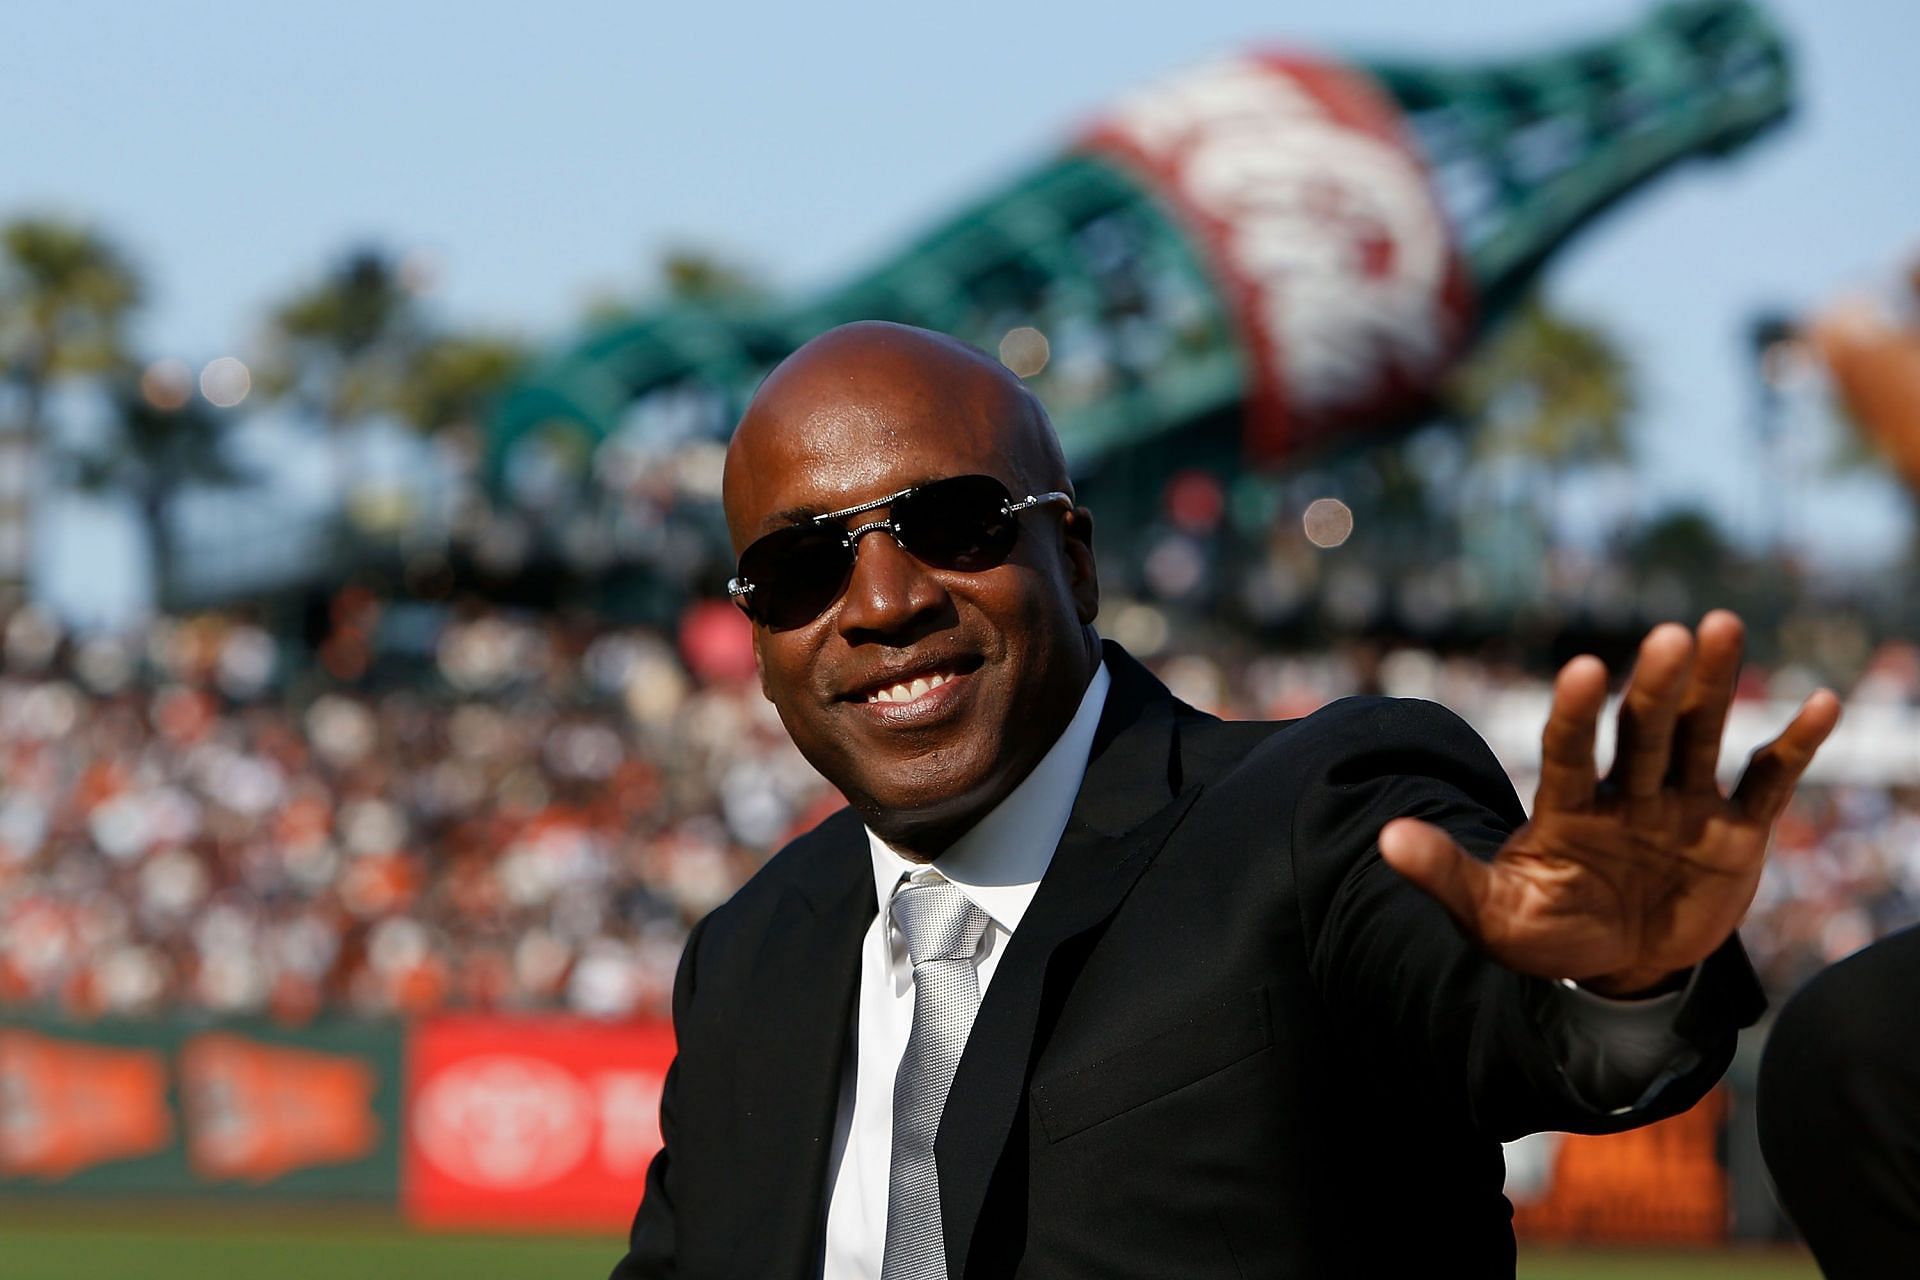 Barry Bonds San Francisco Giants Number 25 Retirement Ceremony: SAN FRANCISCO, CA - AUGUST 11: Former San Francisco Giants player Barry Bonds looks on during a ceremony to retire his #25 jersey at AT&amp;T Park on August 11, 2018 in San Francisco, California. (Photo by Lachlan Cunningham/Getty Images)